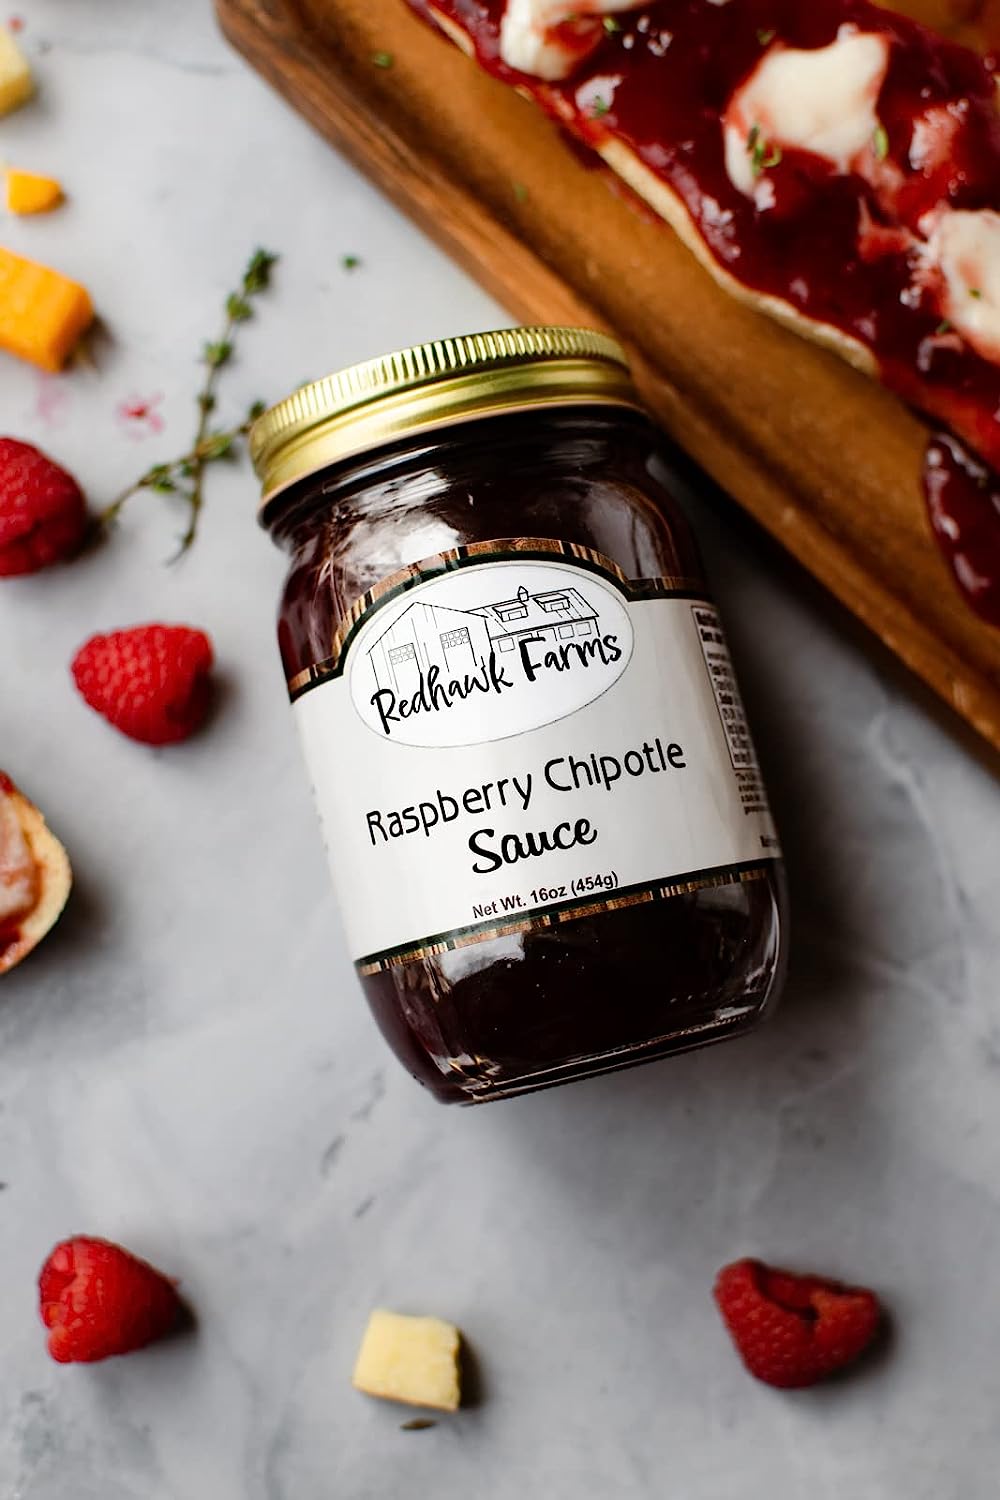 Redhawk Farms Raspberry Chipotle Sauce - All Natural Spicy Sweet and Sour Raspberry Chipotle Drizzle - Gluten Free & Non-GMO - Homemade Jams, Jellies, & Preserves - (16 Oz, Pack Of 2)